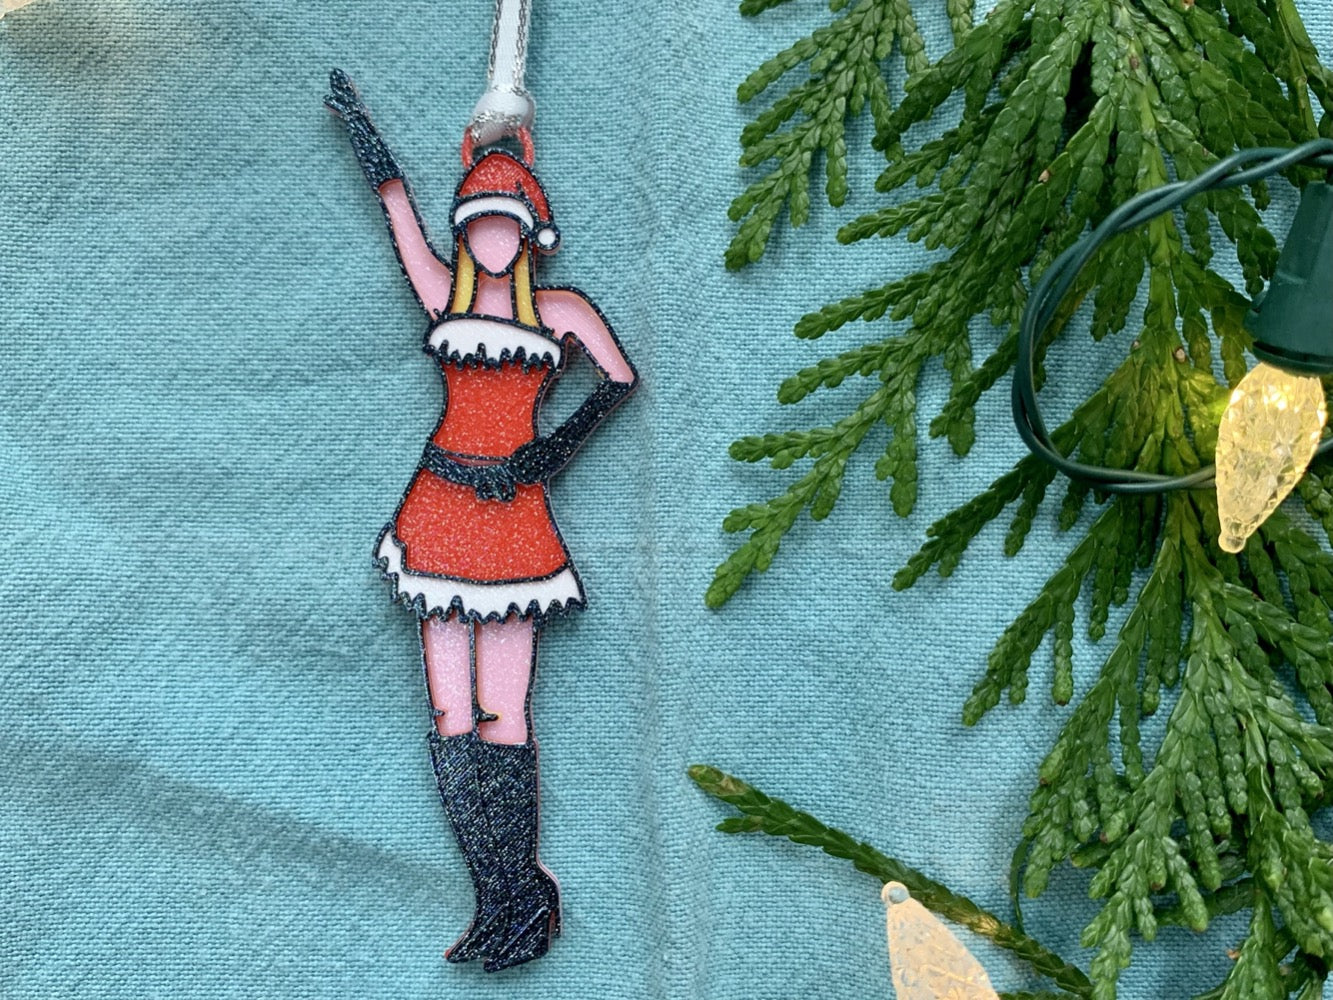 On a bright blue fabric background with green branches and holiday lights to the side is a 3D printed ornament from R+D. The ornament is printed in a plant based filament. It is shaped like Regina George from the movie Mean Girls. She is striking the iconic pose at the beginning of performing Jingle Bell Rock, wearing black gloves and boots and a red outfit with white trim. The entire ornament is covered in glitter to shimmer and shine in the light.